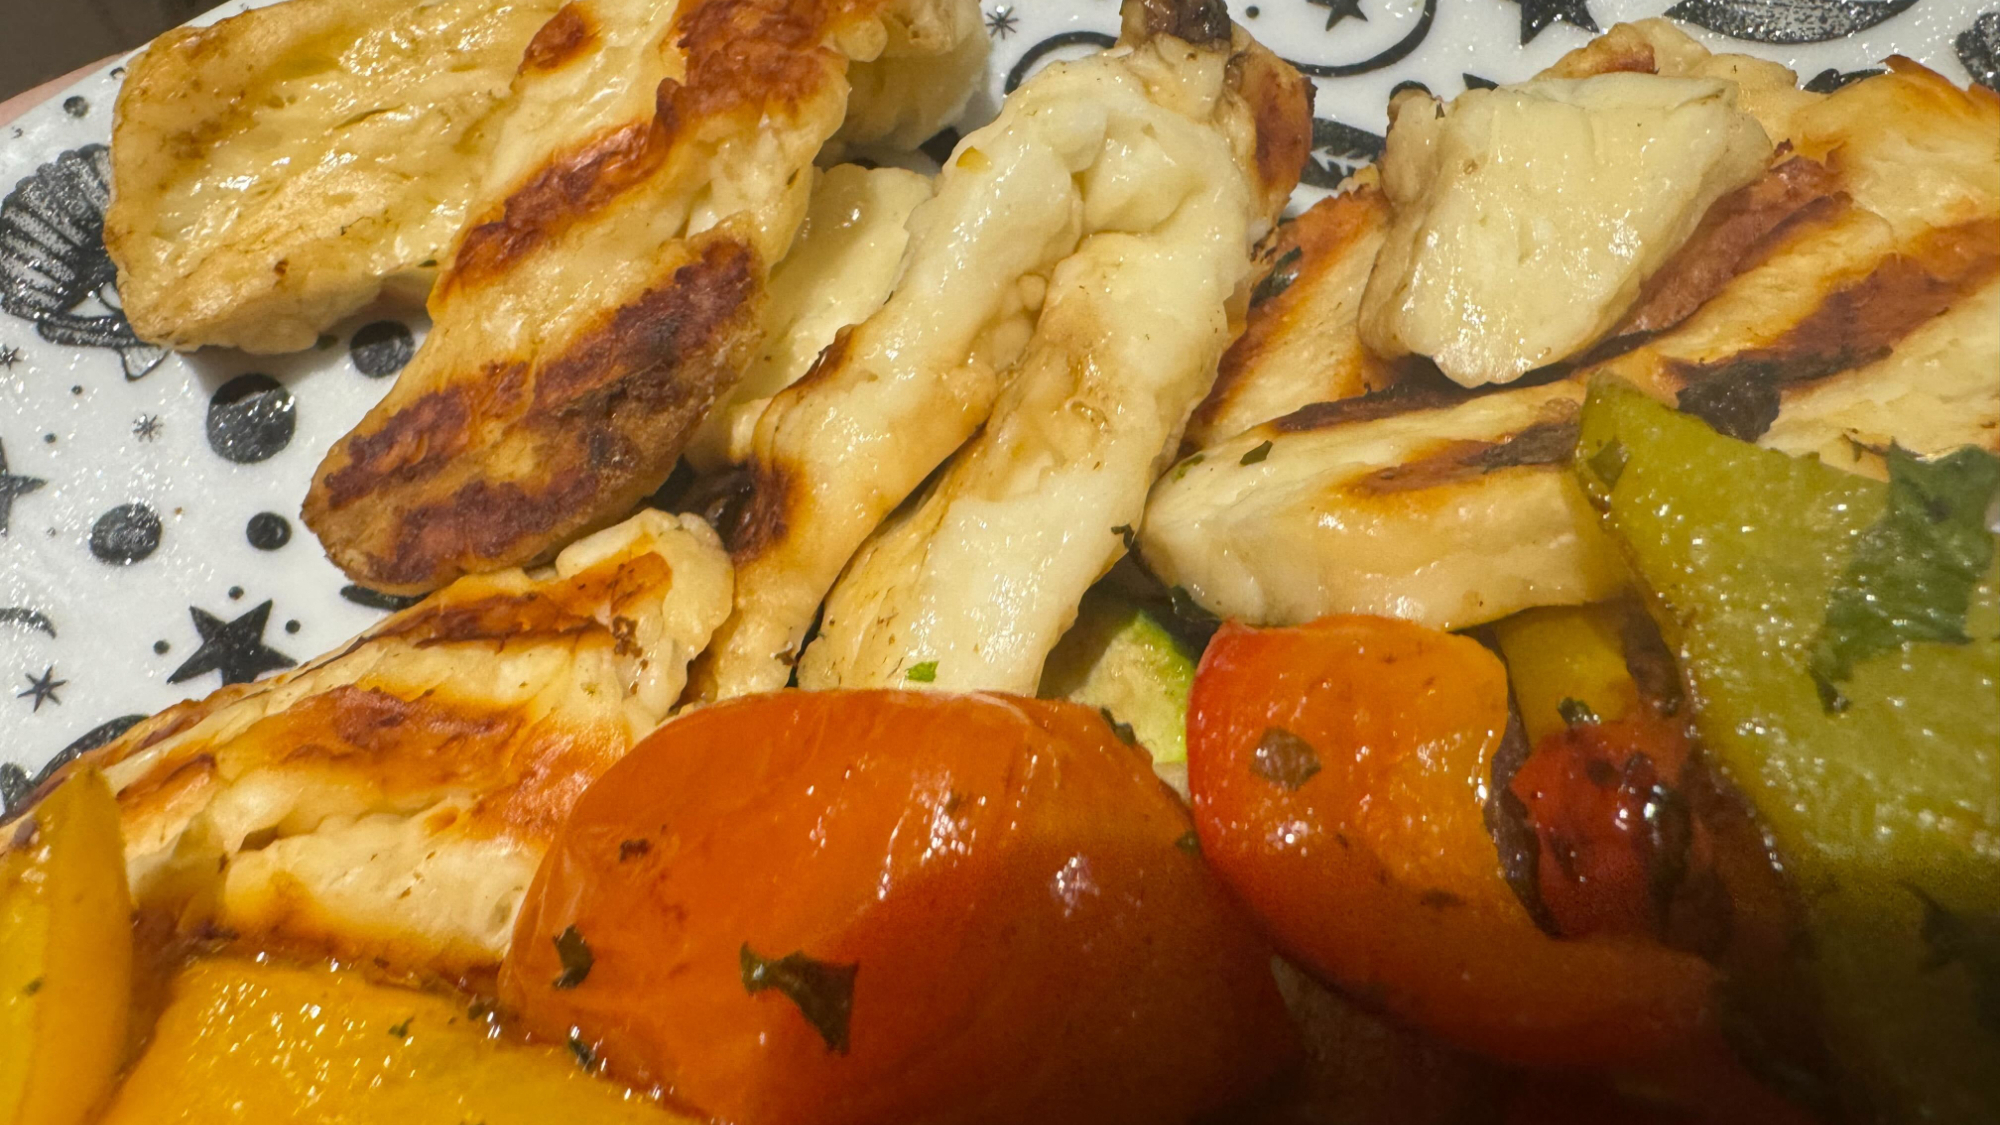 Plate with Woodfire smoked halloumi and vegetables